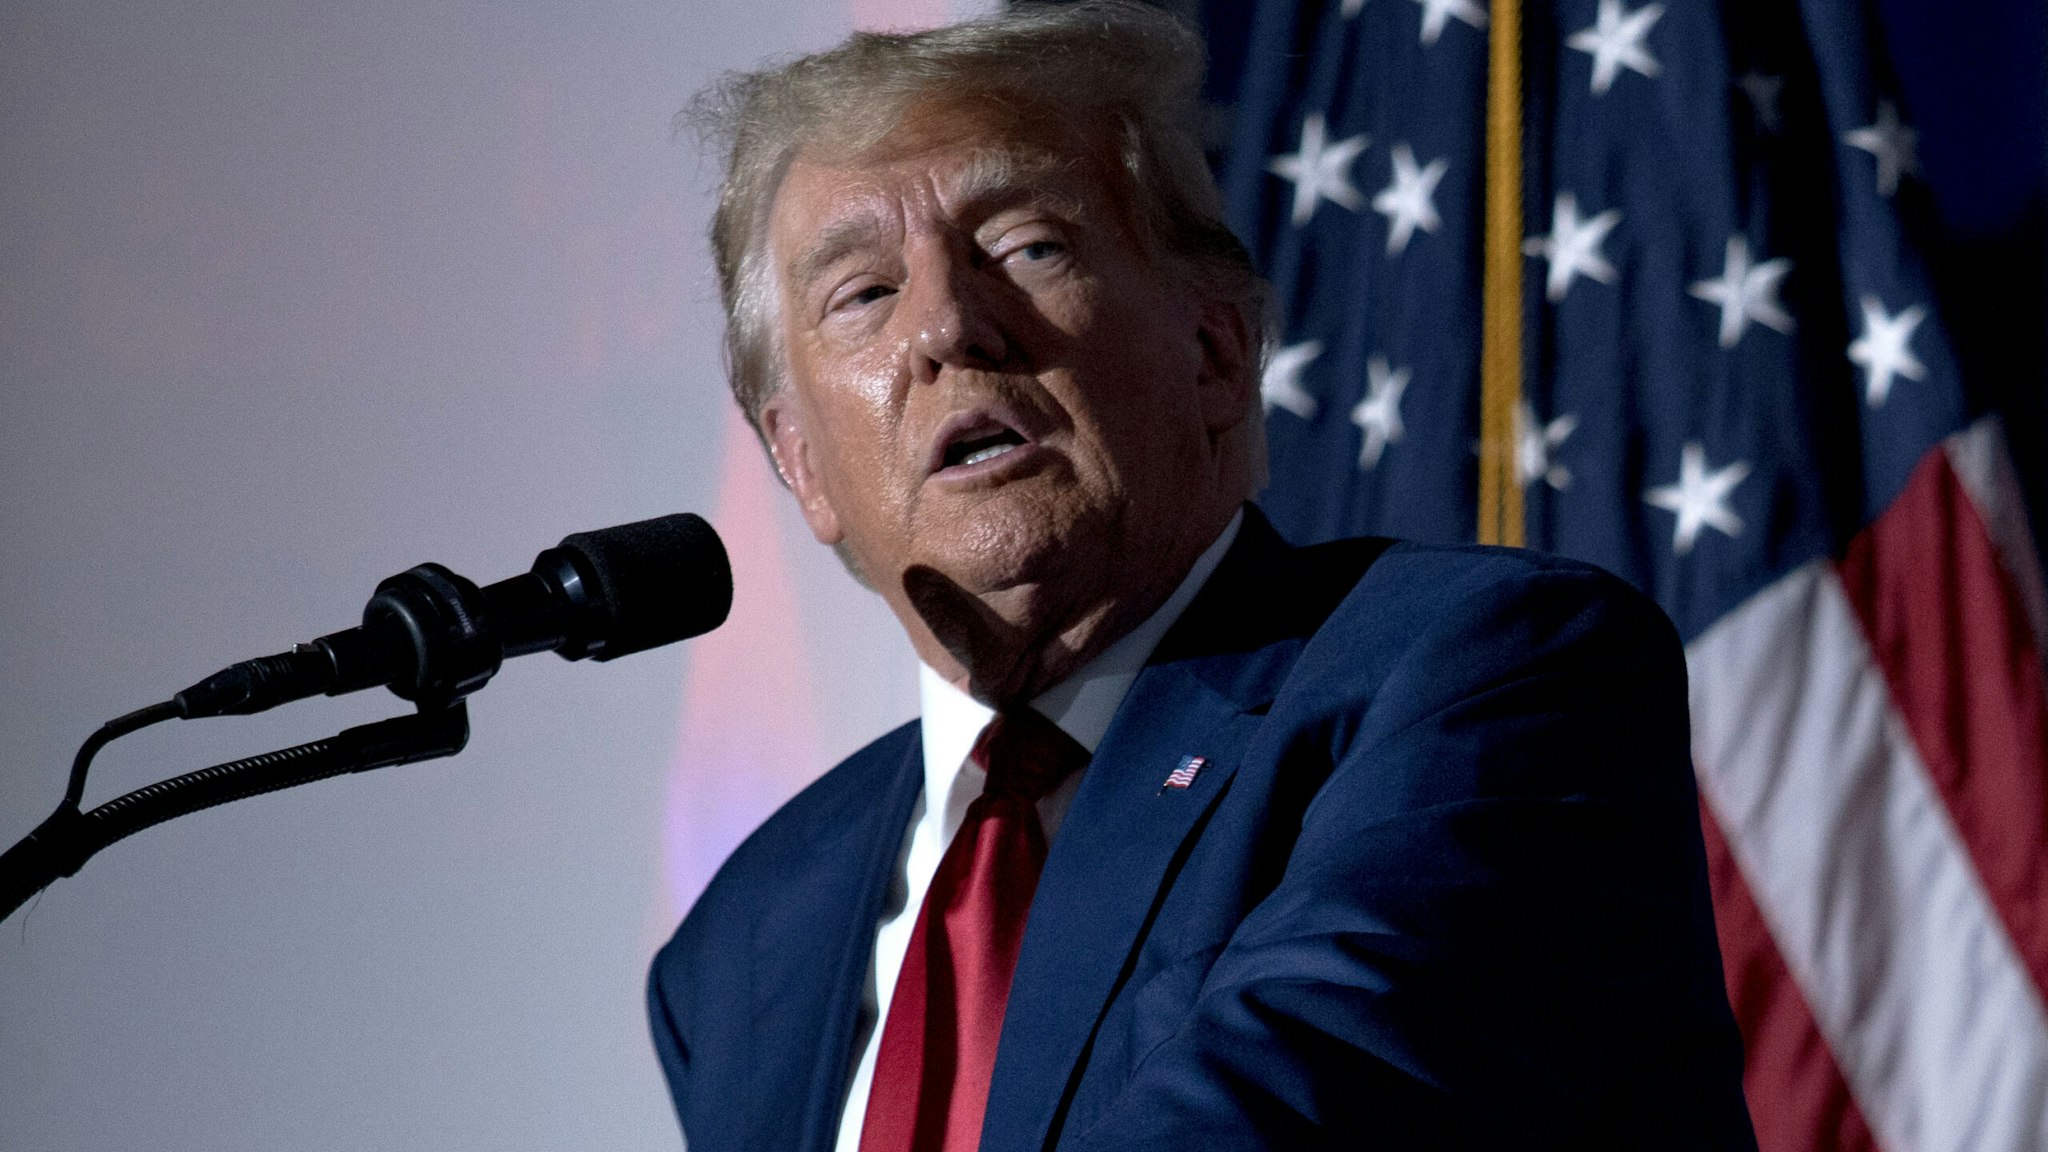 WINDHAM, NH - AUGUST 8: Former president Donald Trump hosted a campaign event at Windham High School in Windham, New Hampshire on Tuesday, August 8, 2023.